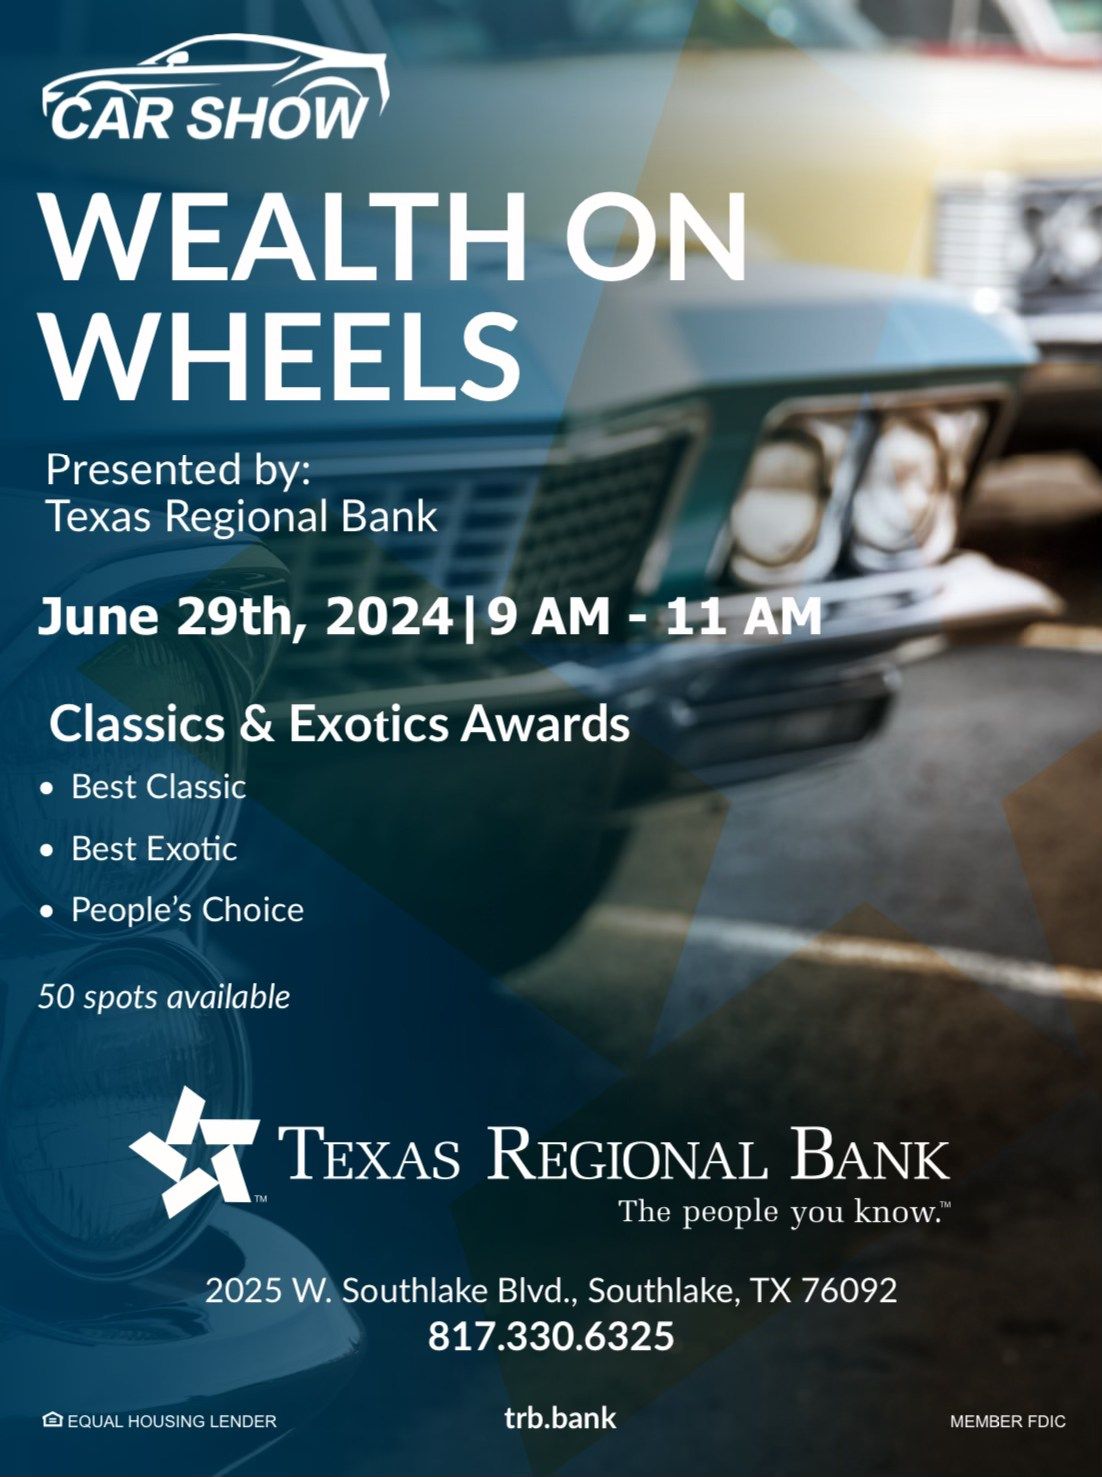 Wheels for Wealth-Car Show